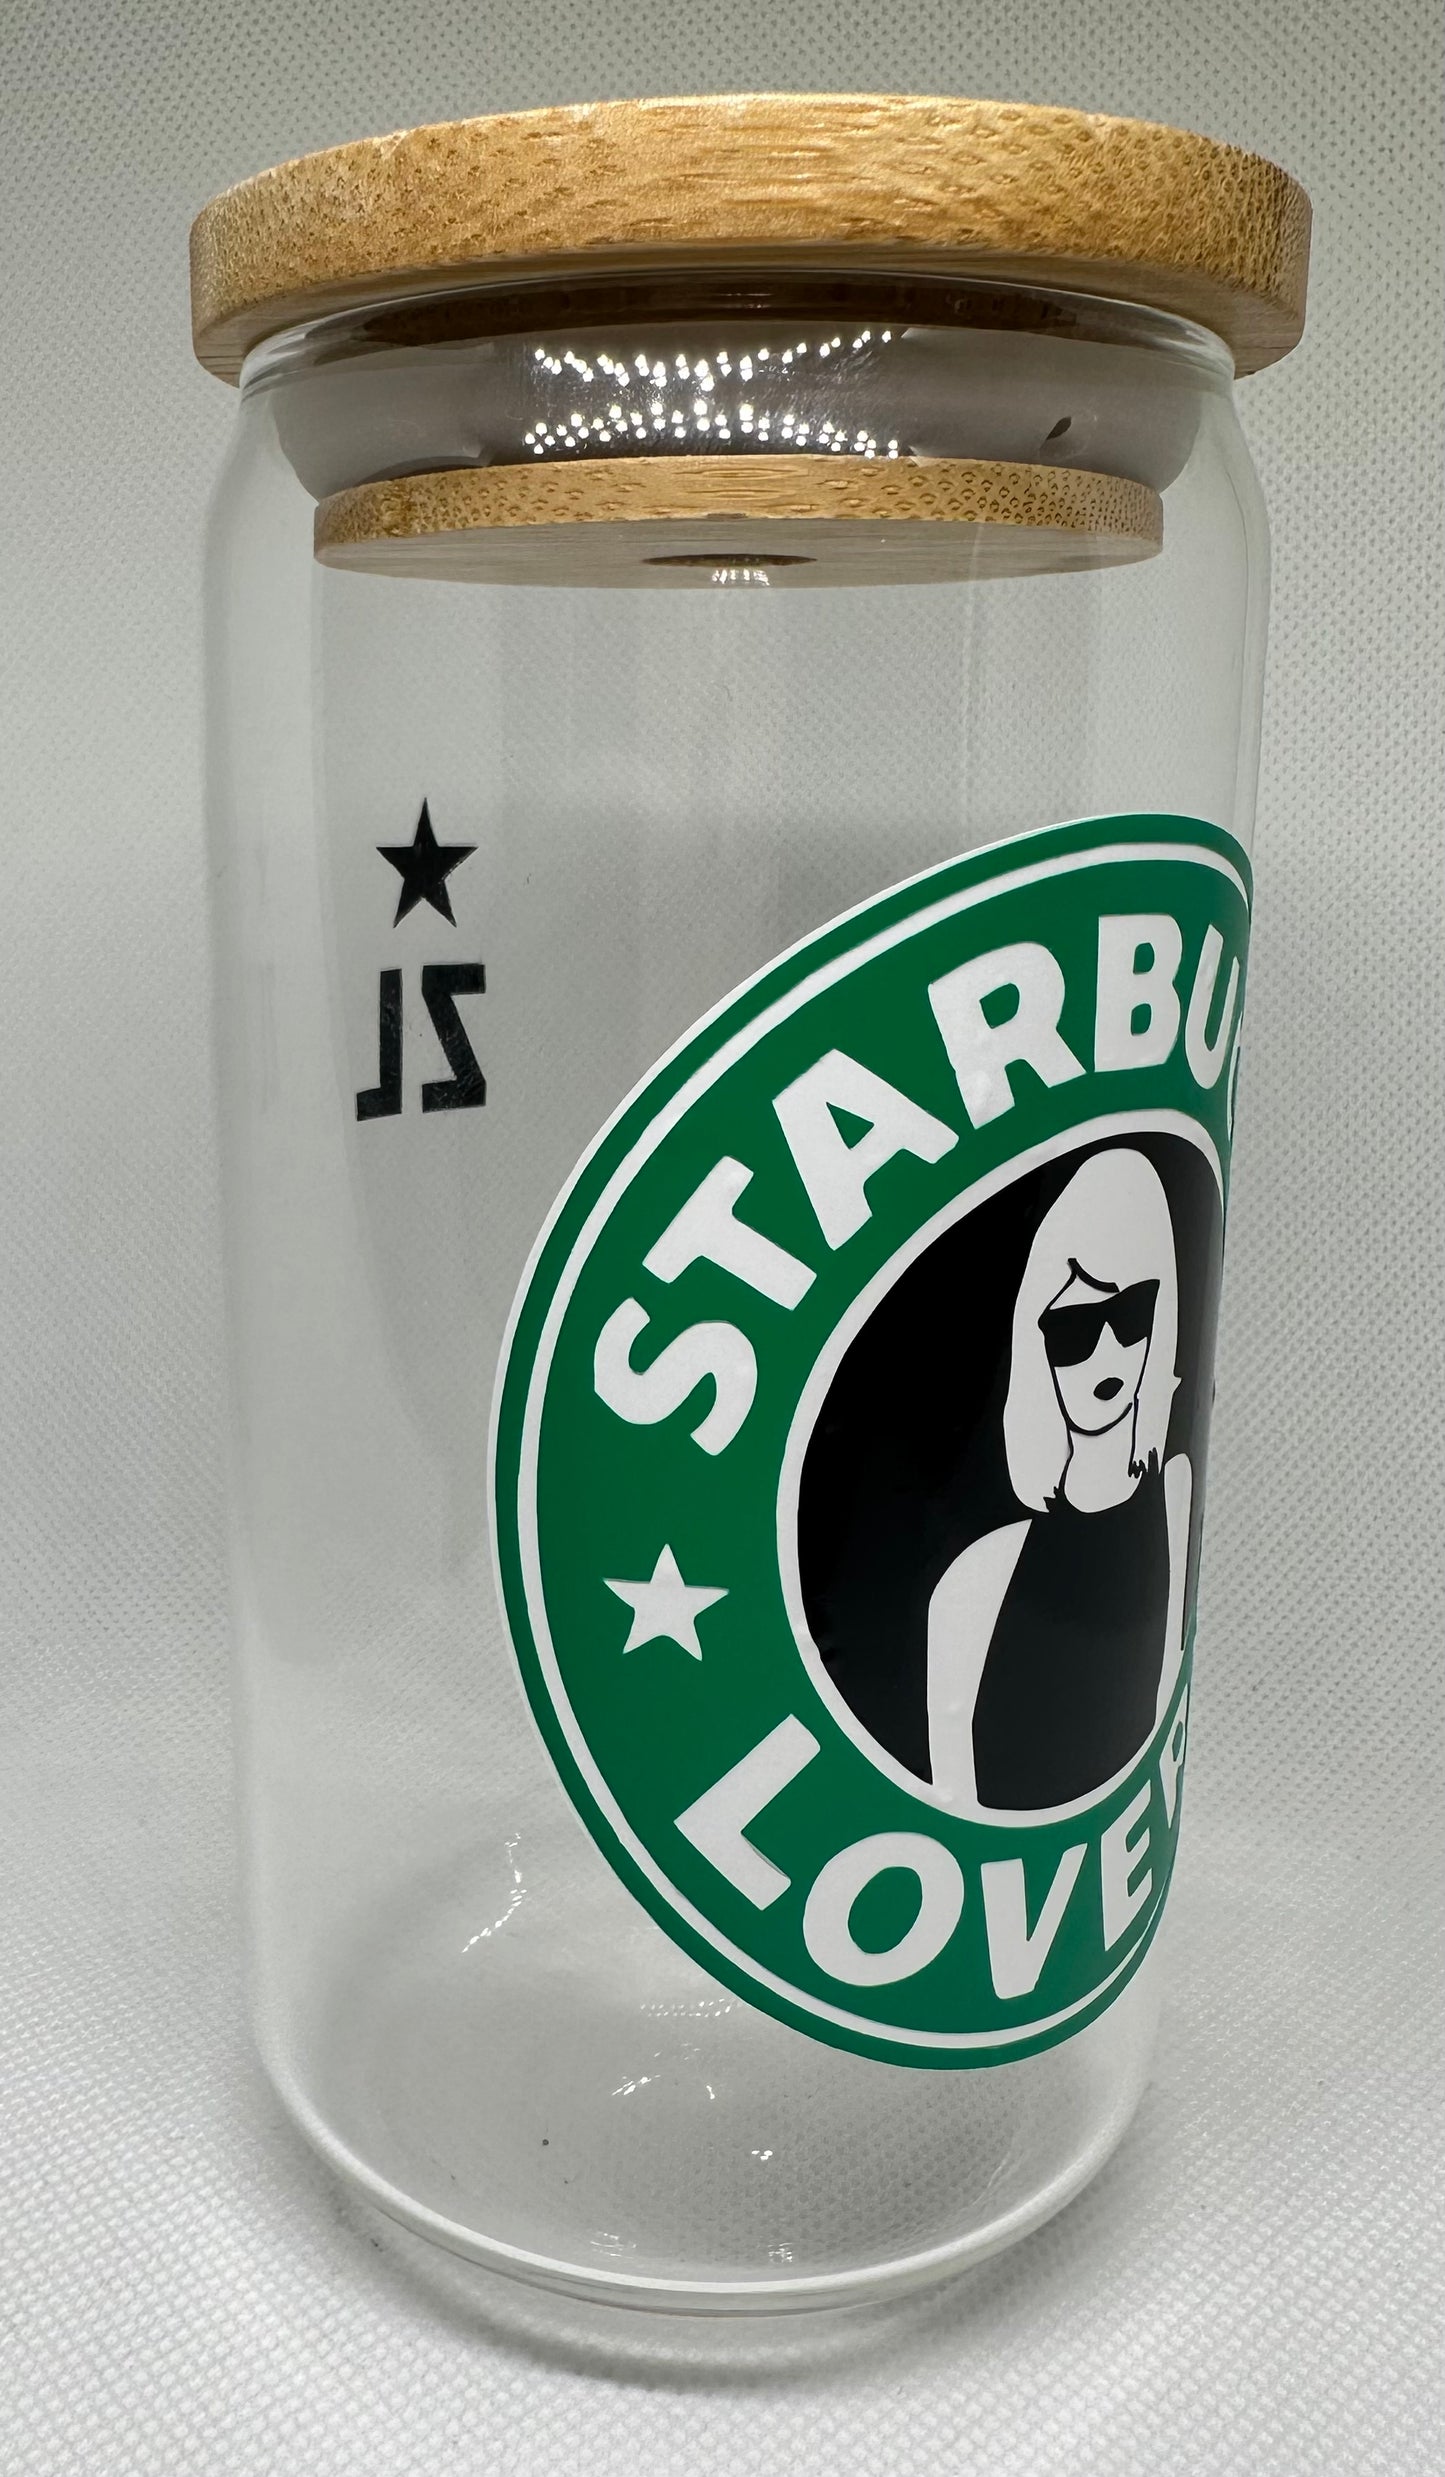 Starbucks Lovers (Swiftie) glass with bamboo lid and straw 16oz